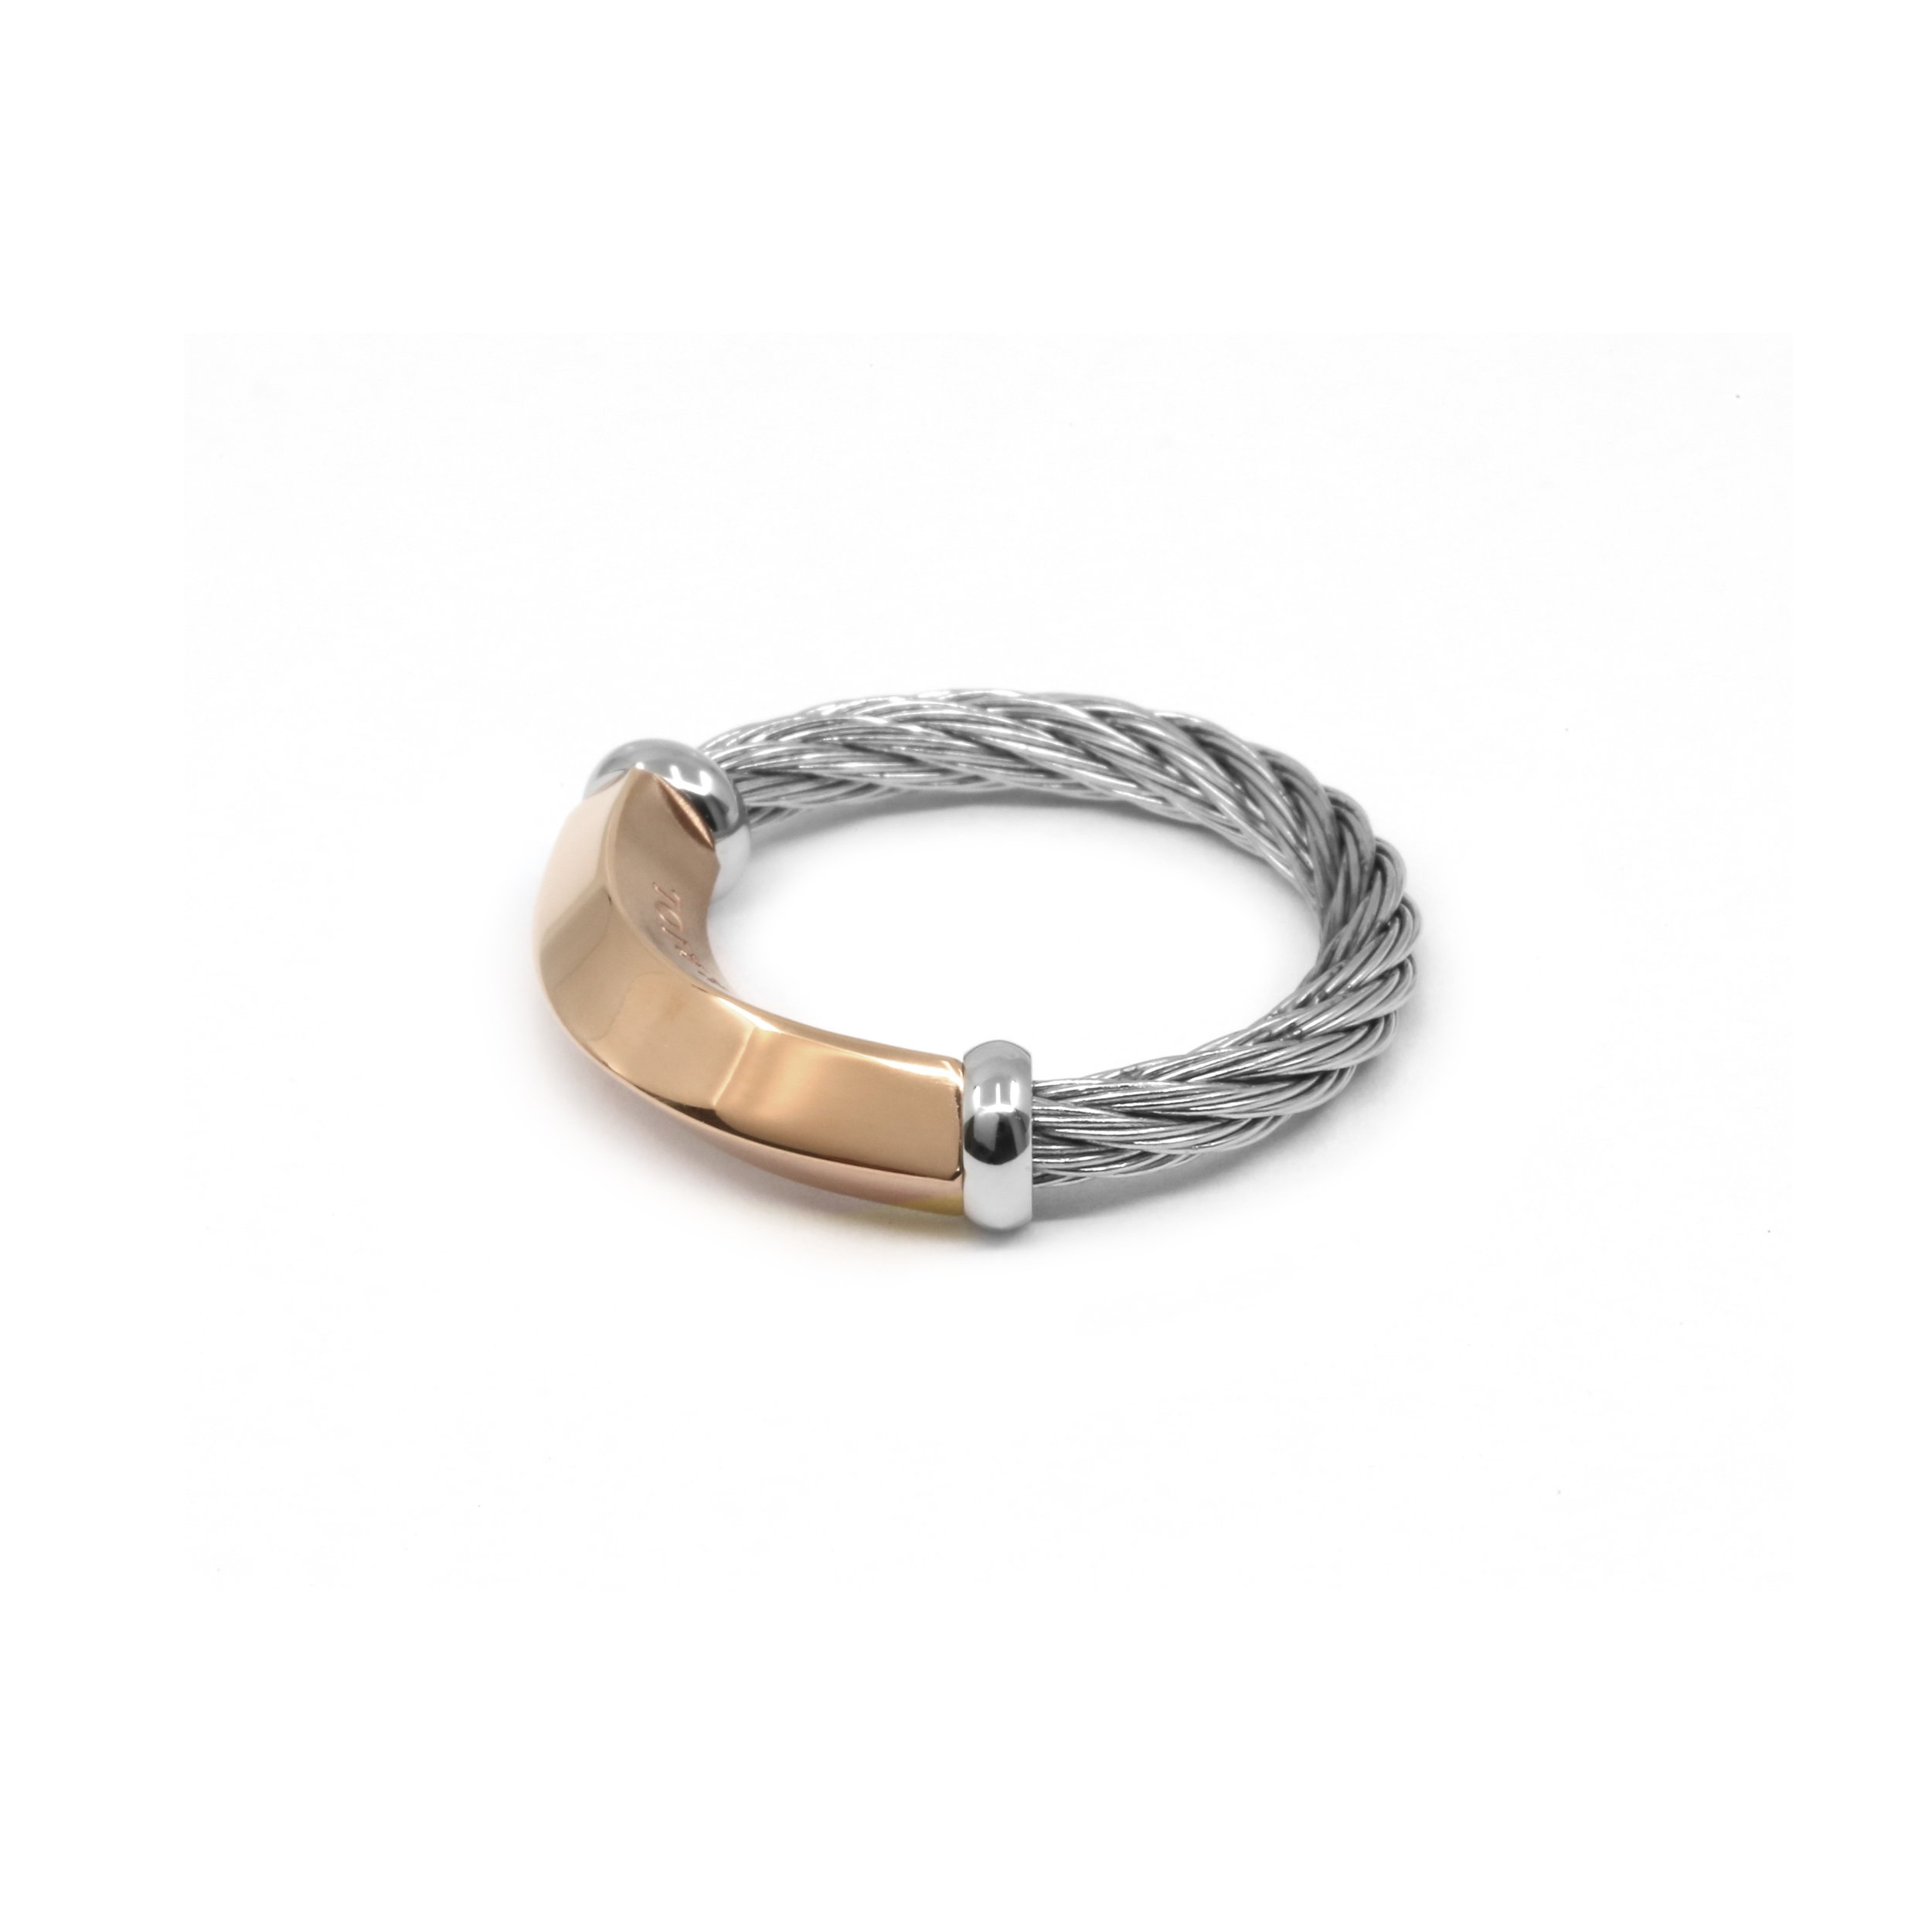 Better Half Ring - Rose Gold Decor, Stainless Steel Cable.jpg